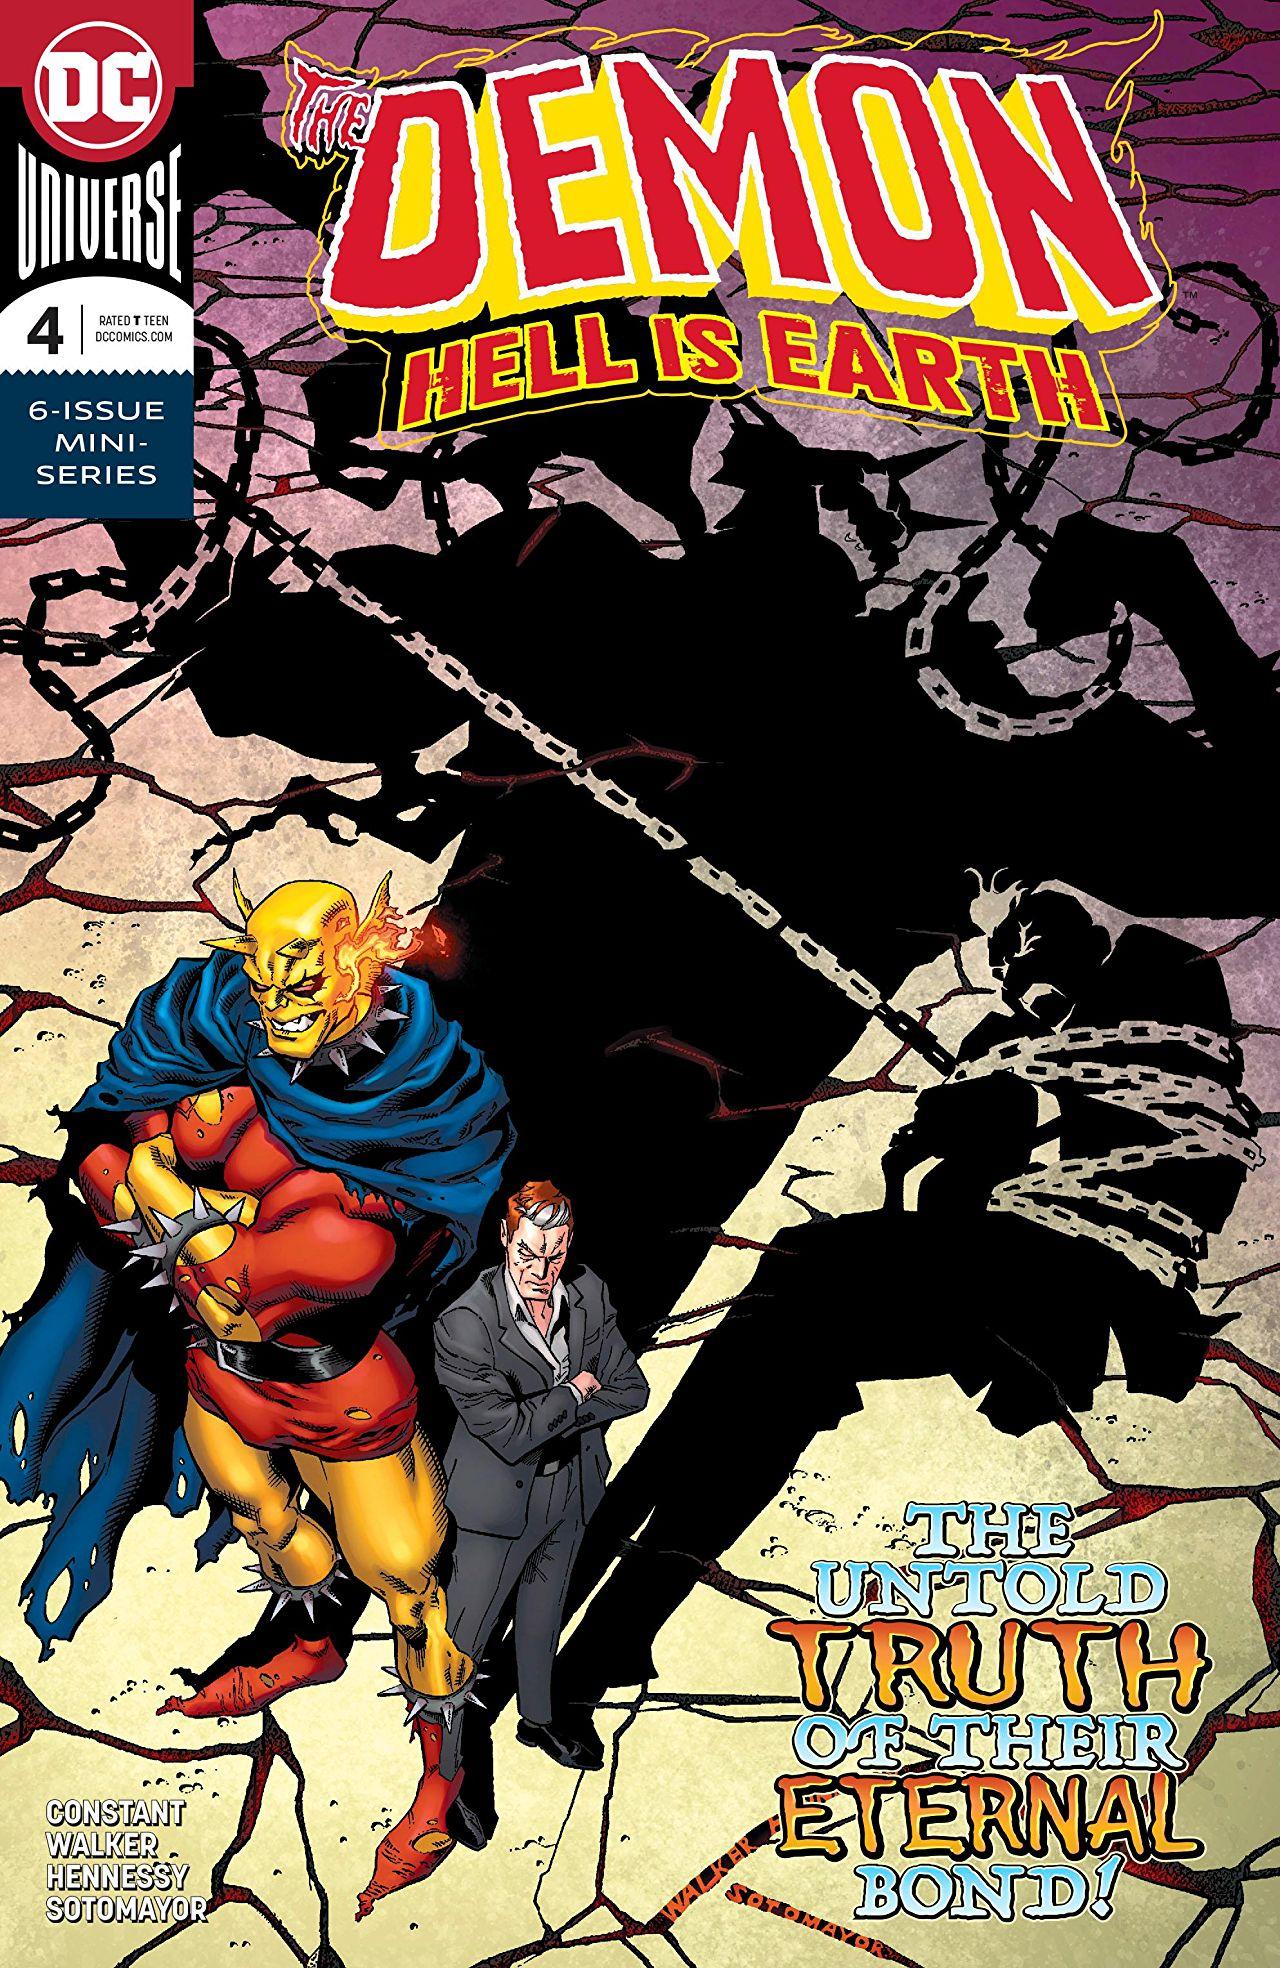 The Demon: Hell Is Earth Vol. 1 #4